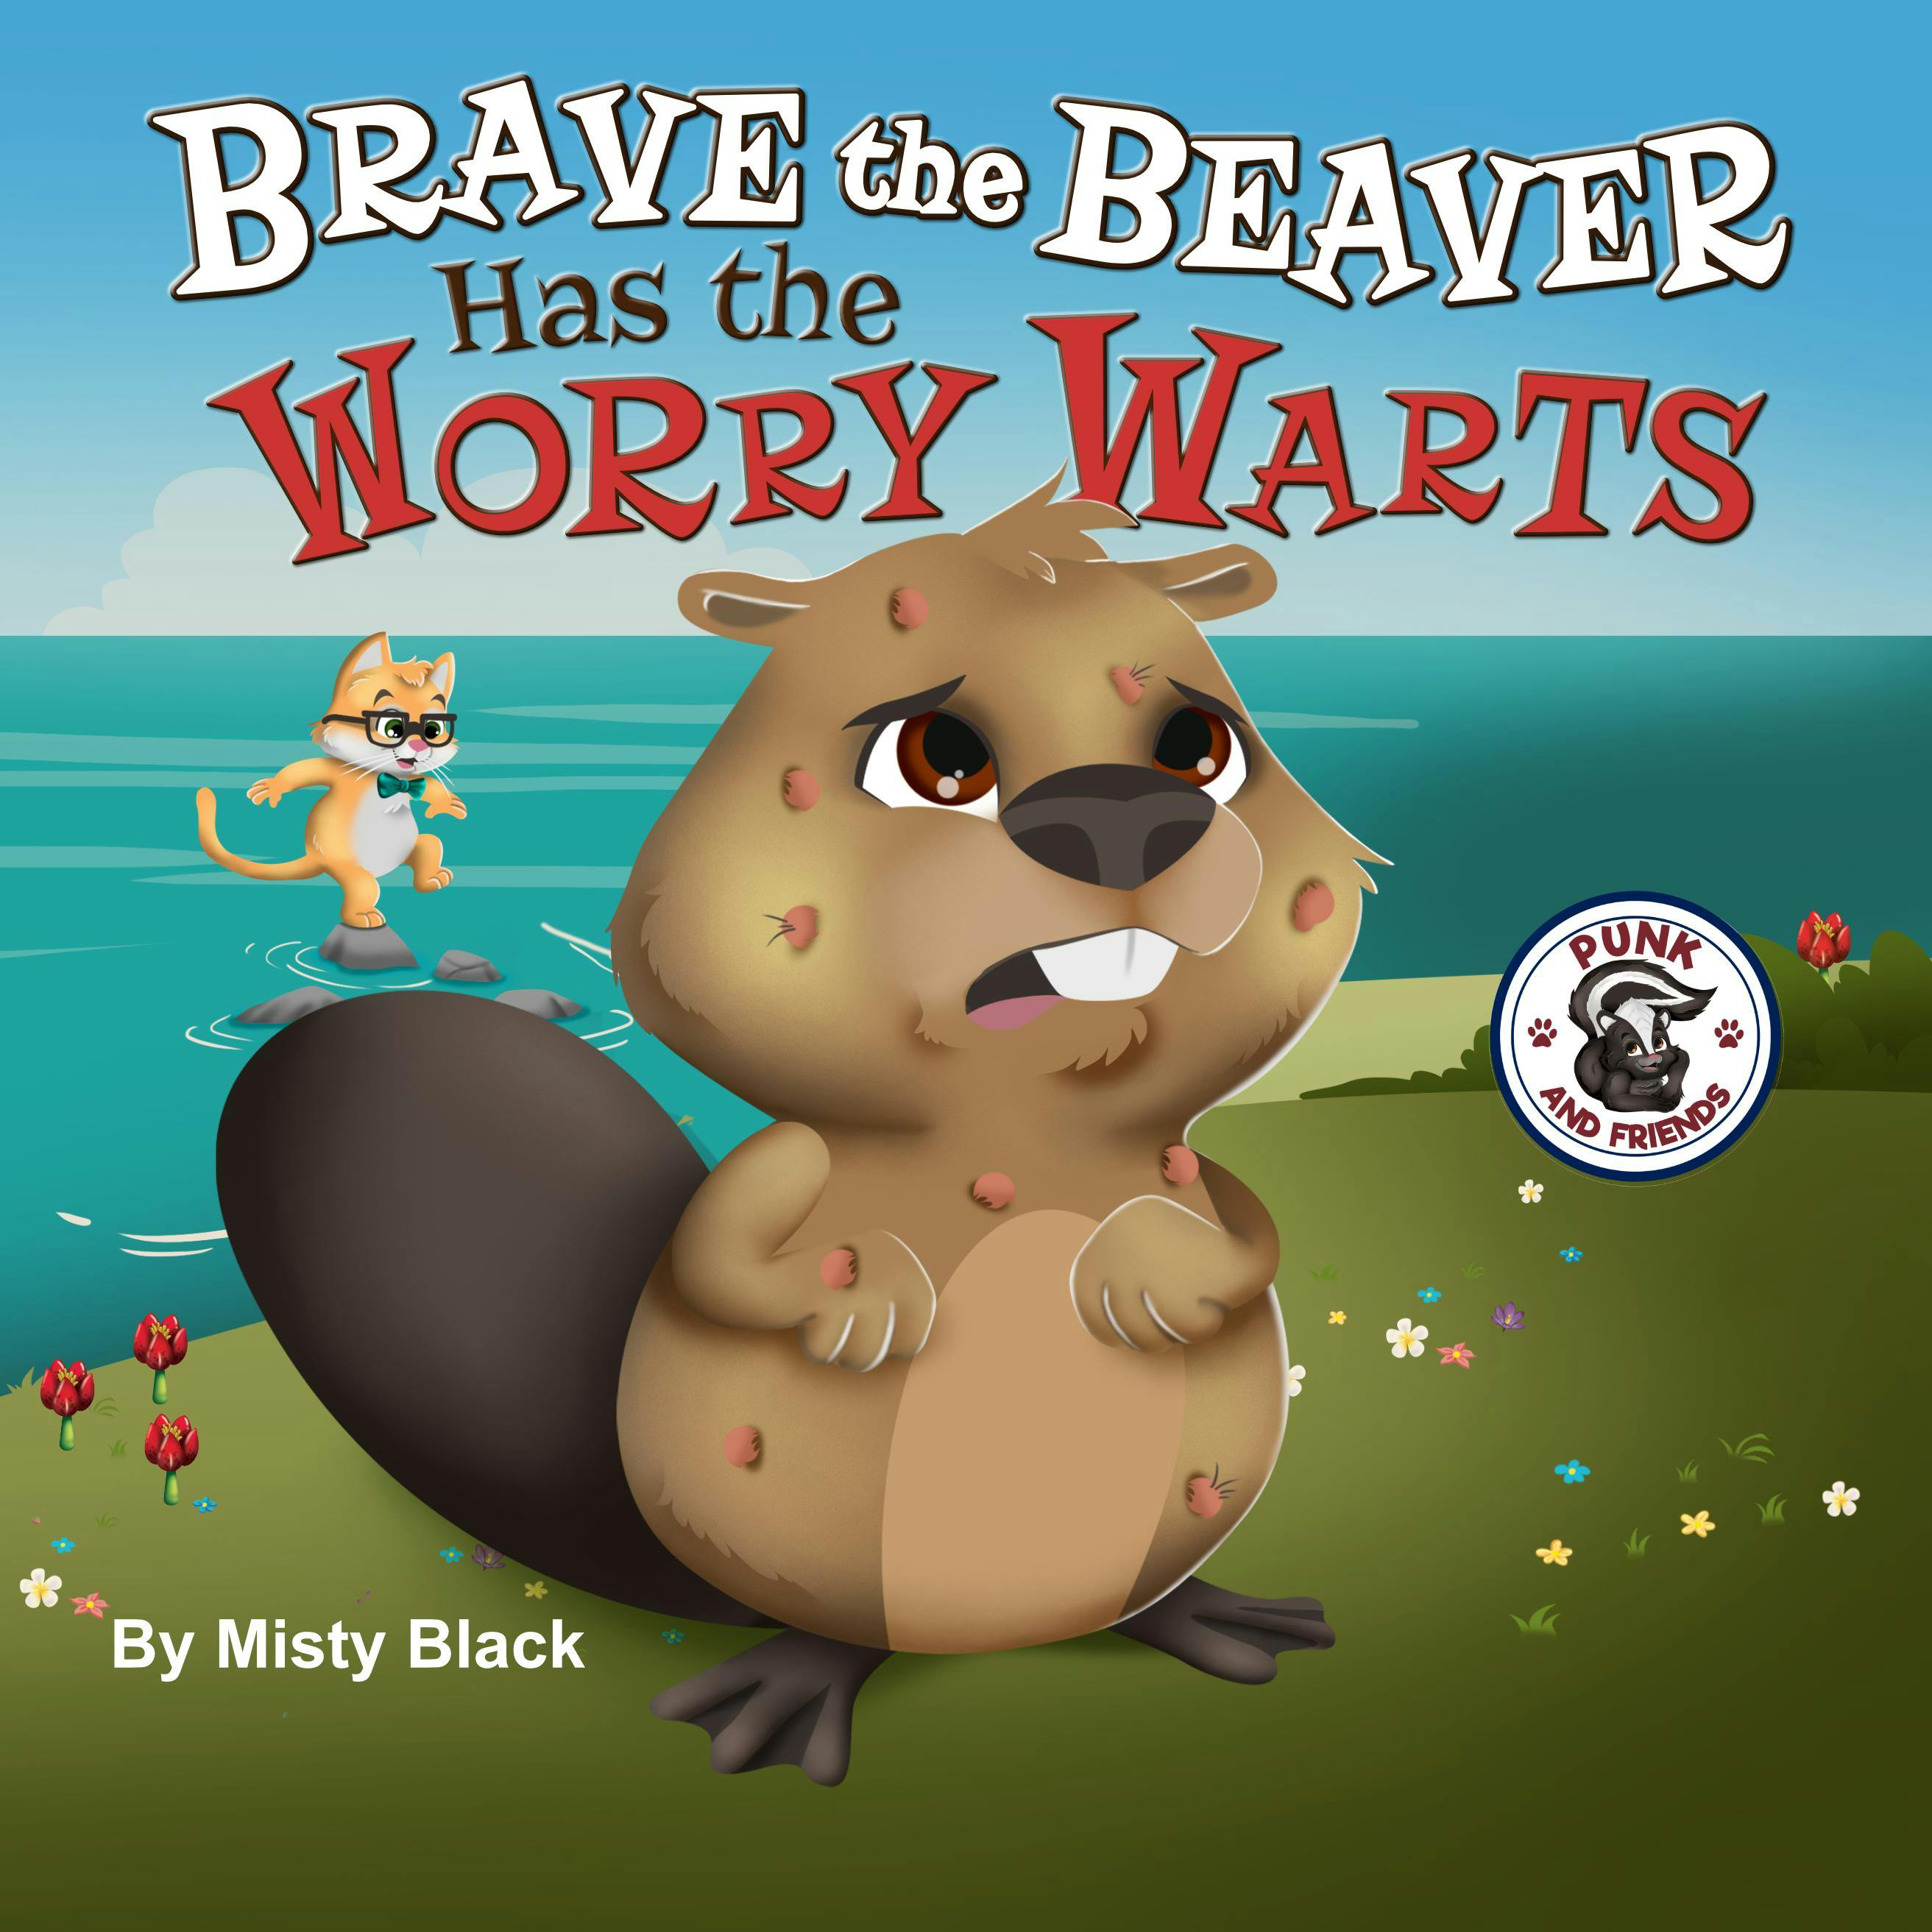 Brave the Beaver Has the Worry Warts - Berry Patch Press L.L.C., Misty Black